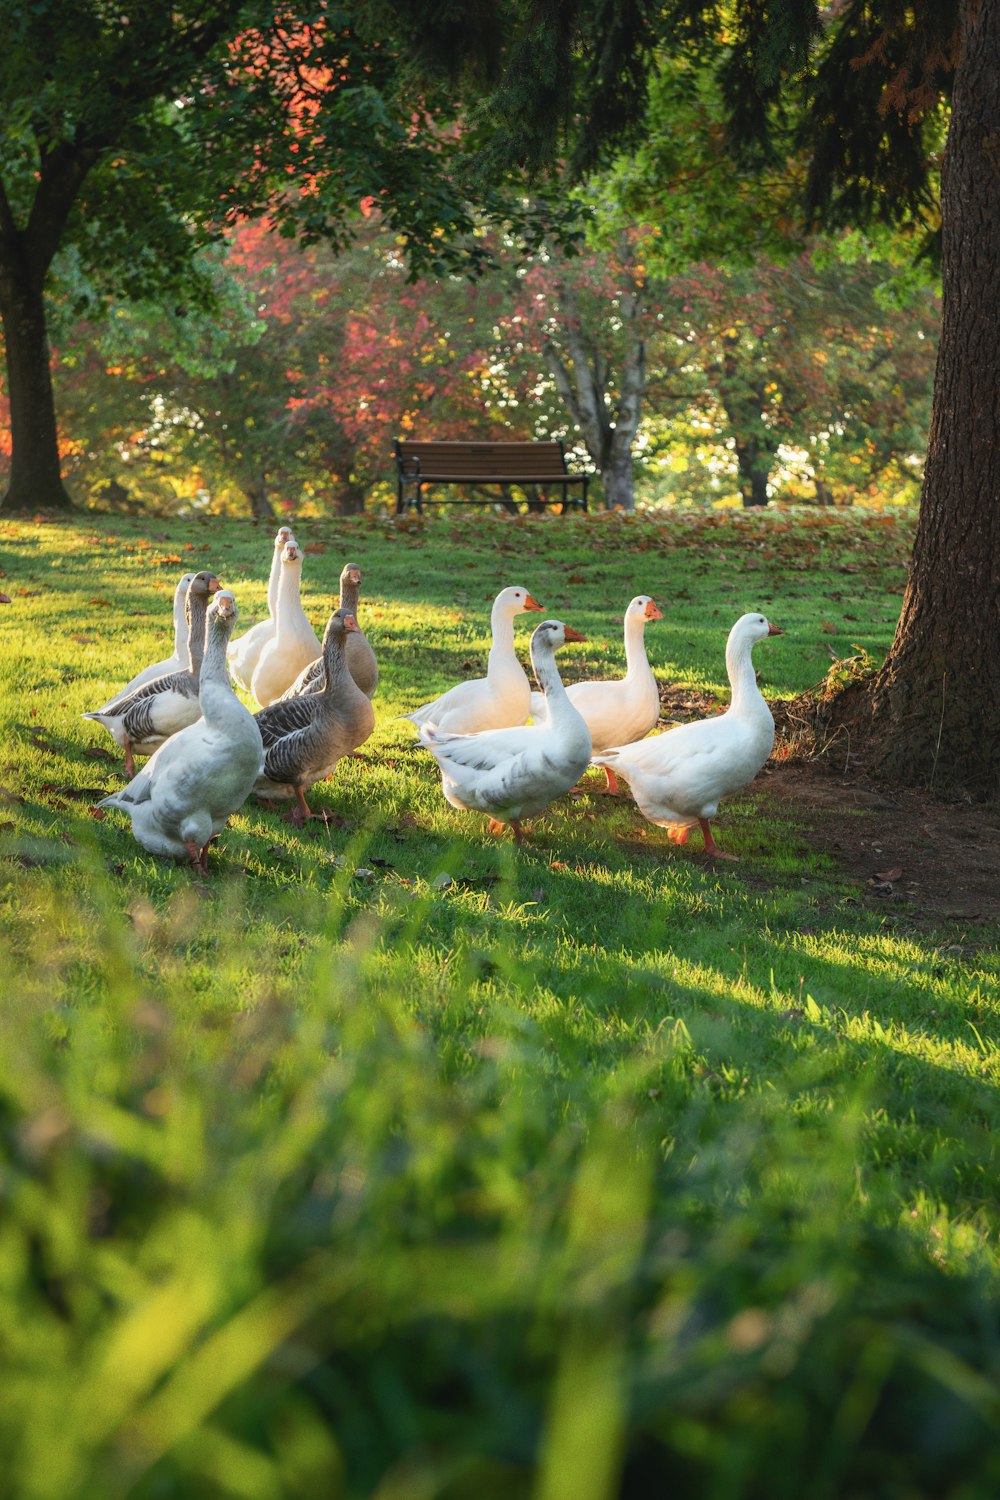 a group of ducks walking in the grass near a tree